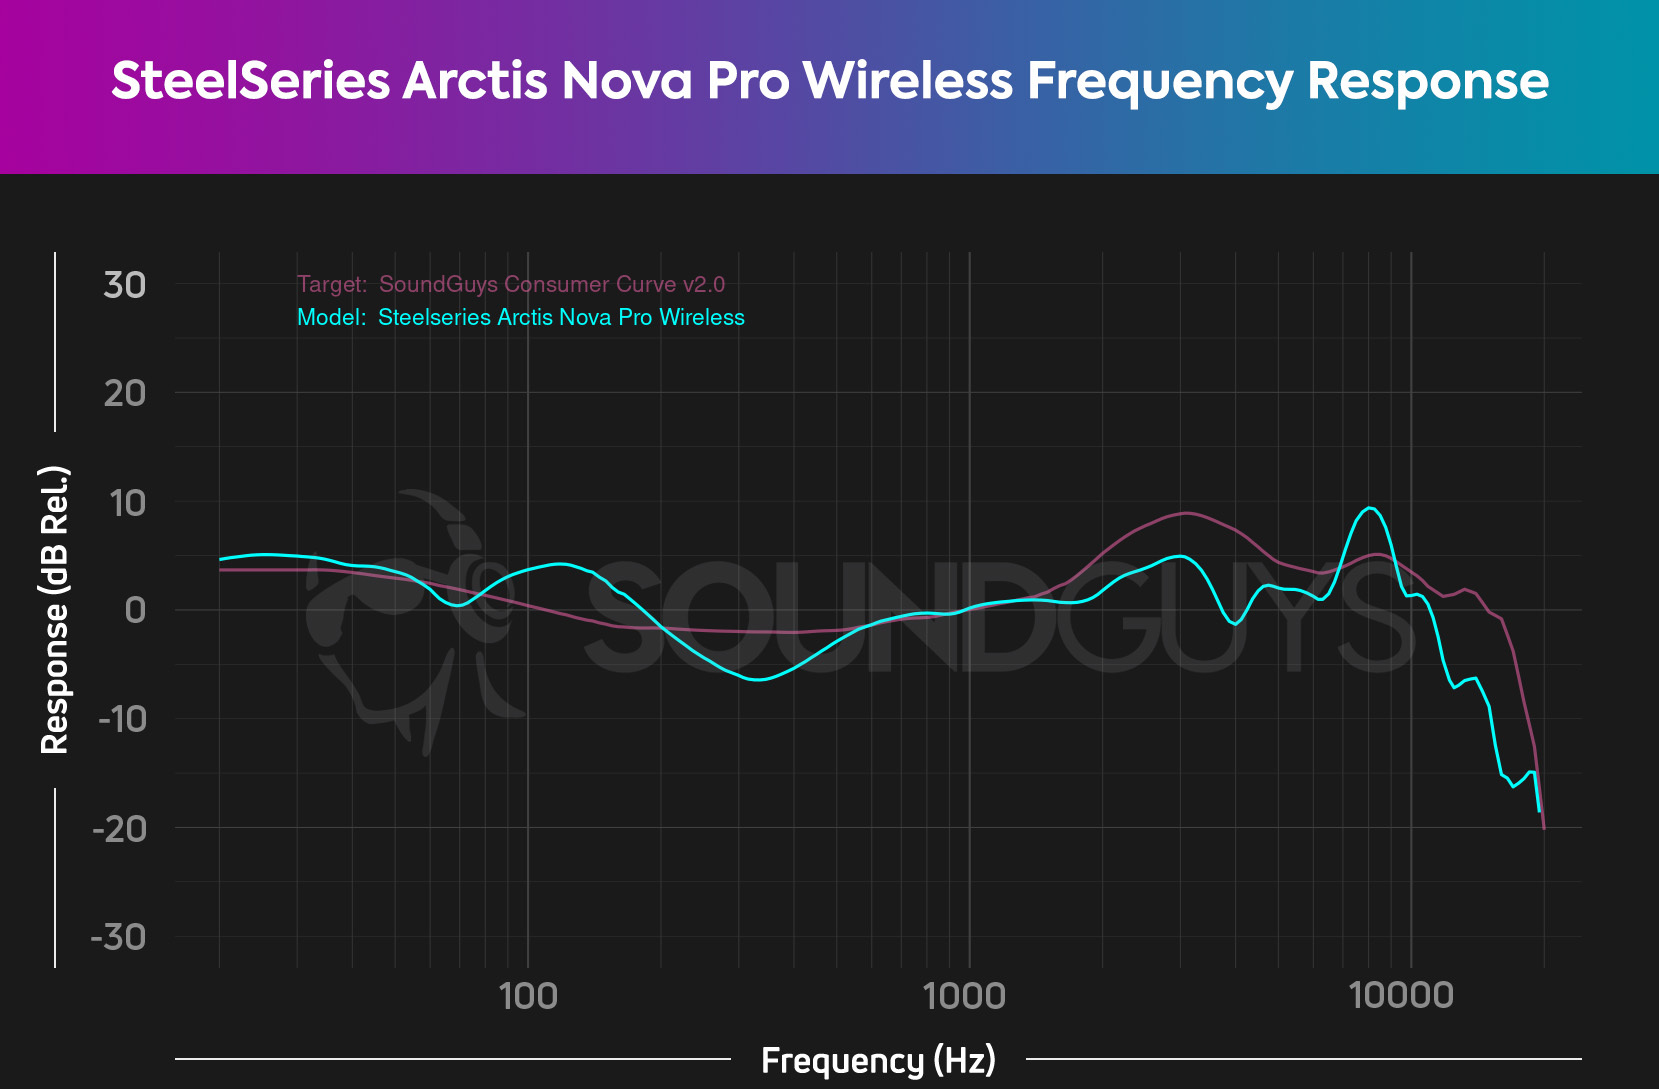 The frequency response chart of the SteelSeries Arctis Nova Pro Wireless, showing a frequency response that sticks fairly closely to our ideal consumer curve.